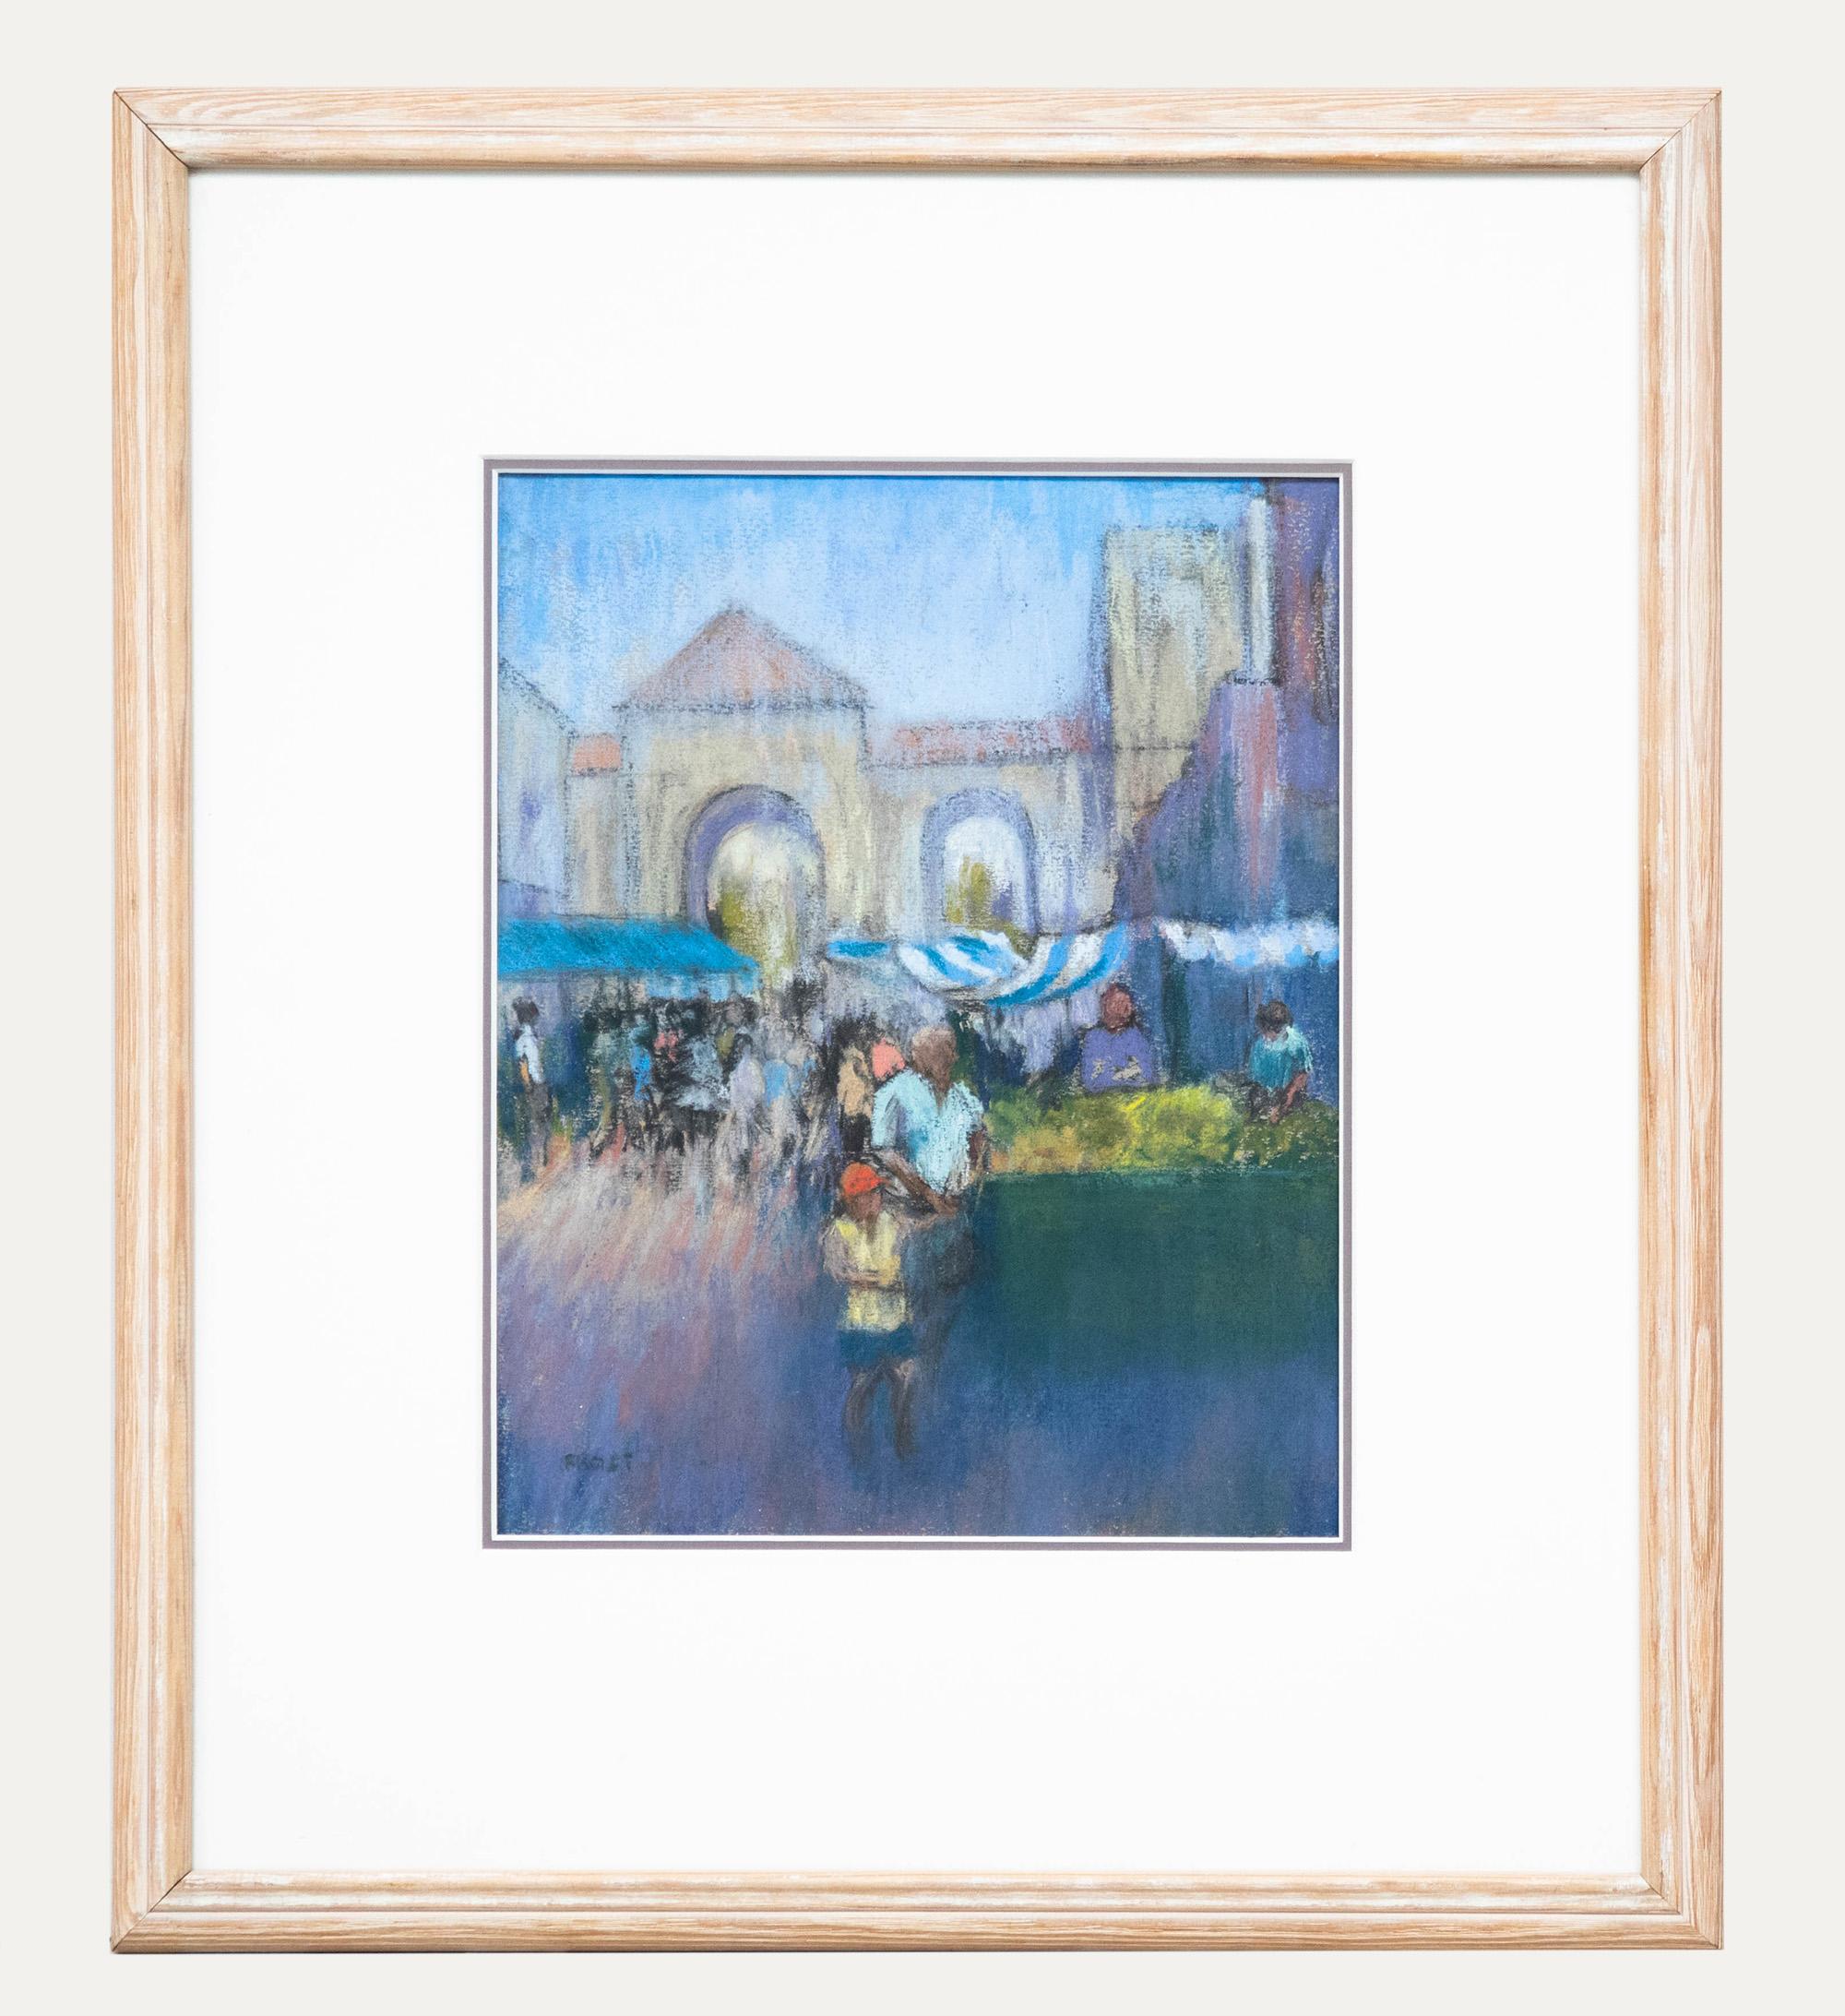 Unknown Landscape Art - Michael Frost - 20th Century Pastel, Market Day in Andalusia